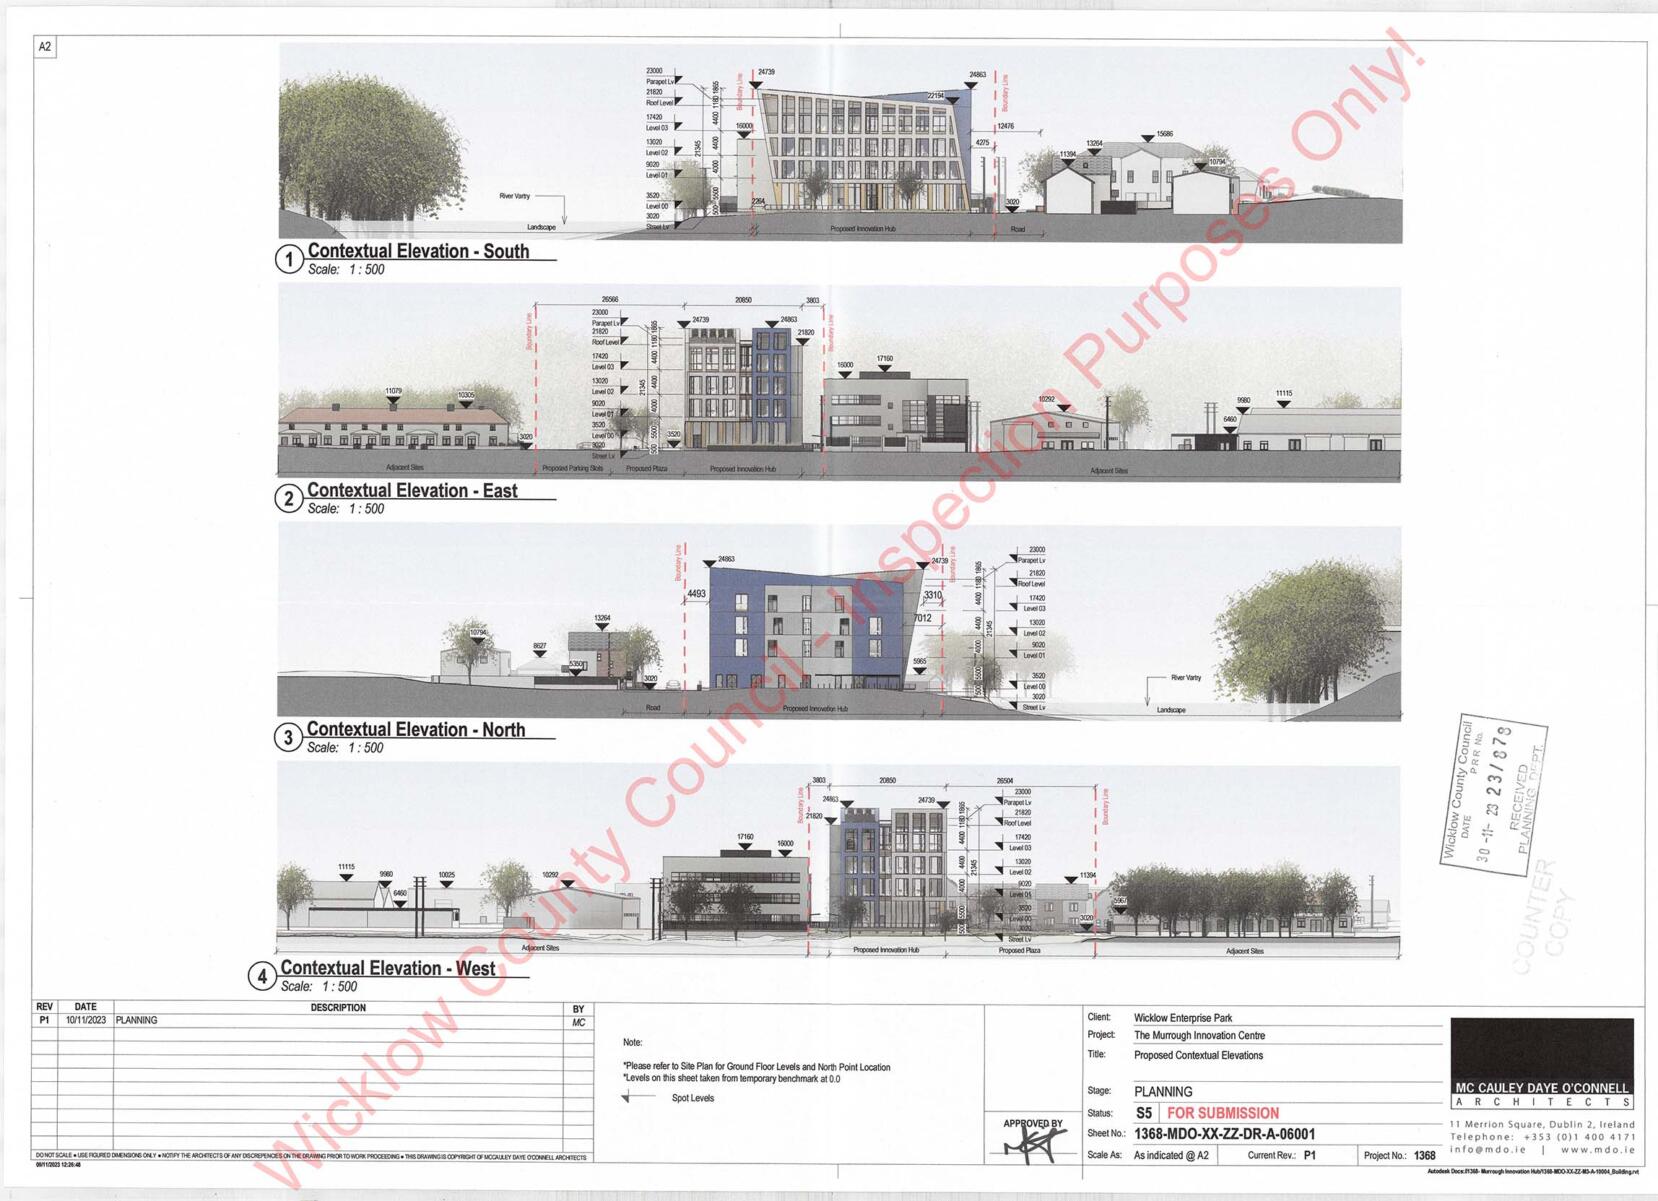 elevation plans of the proposed development in Wicklow